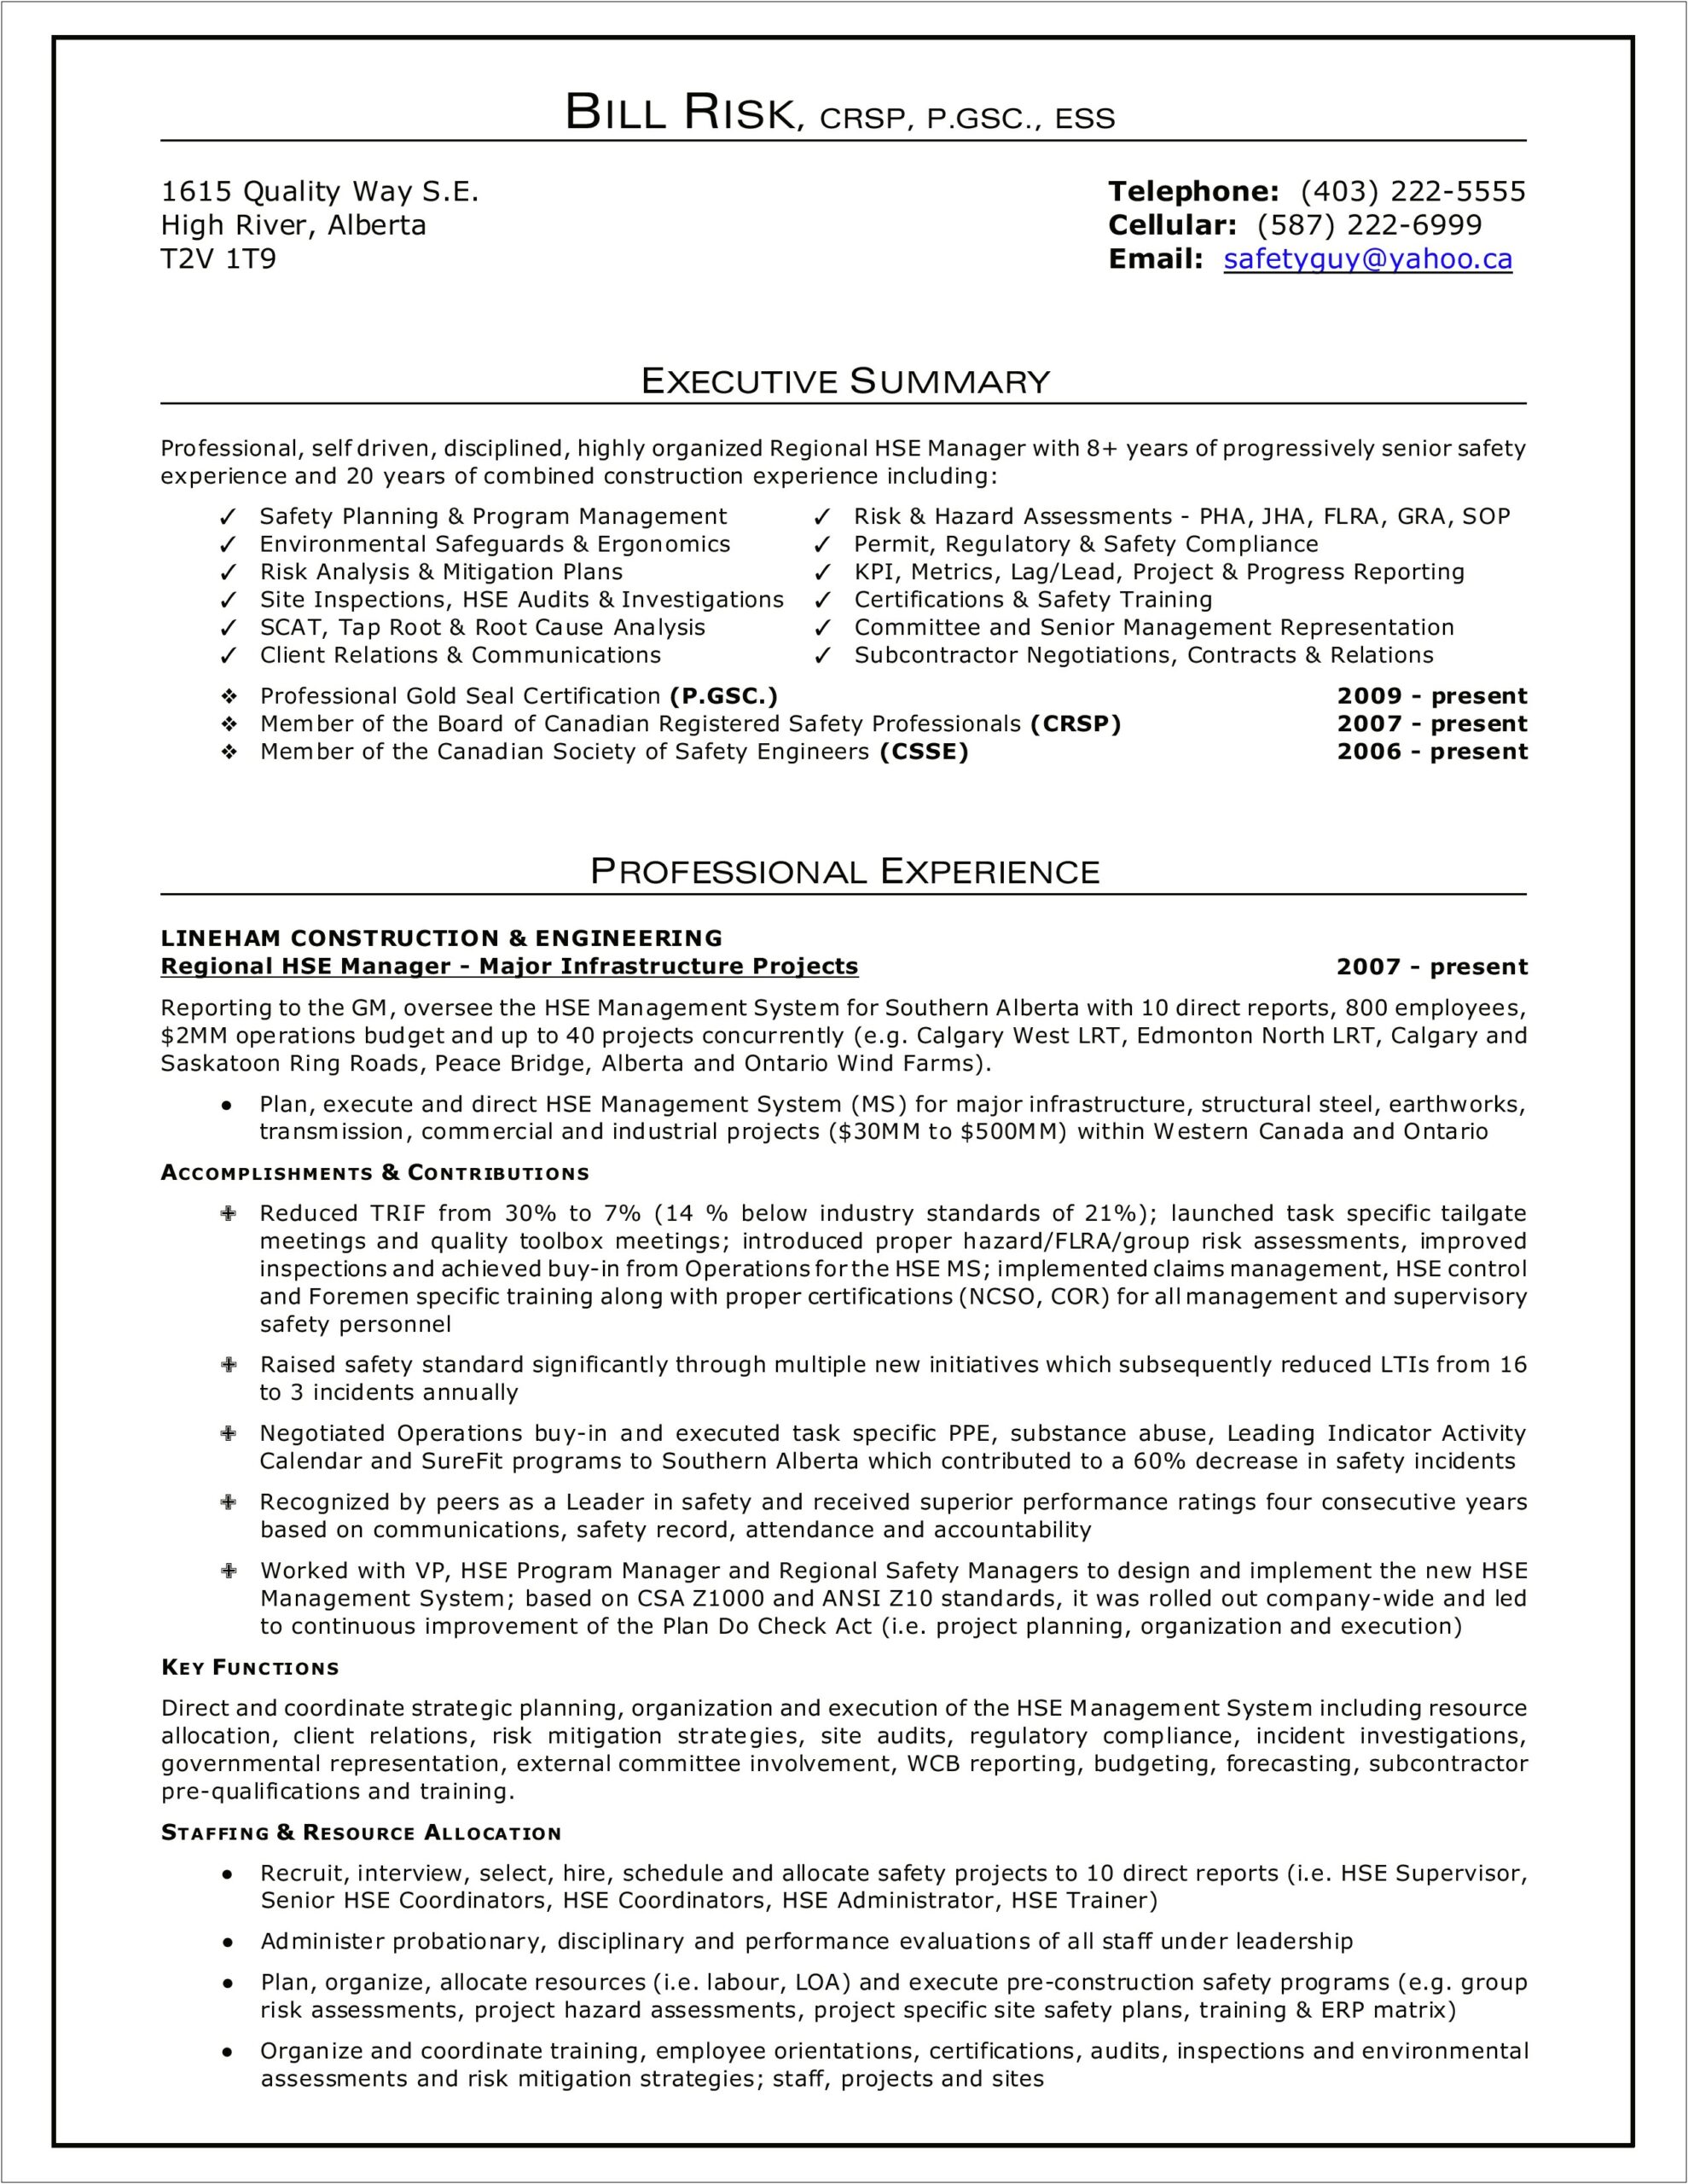 Best Executive Summary For A Resume